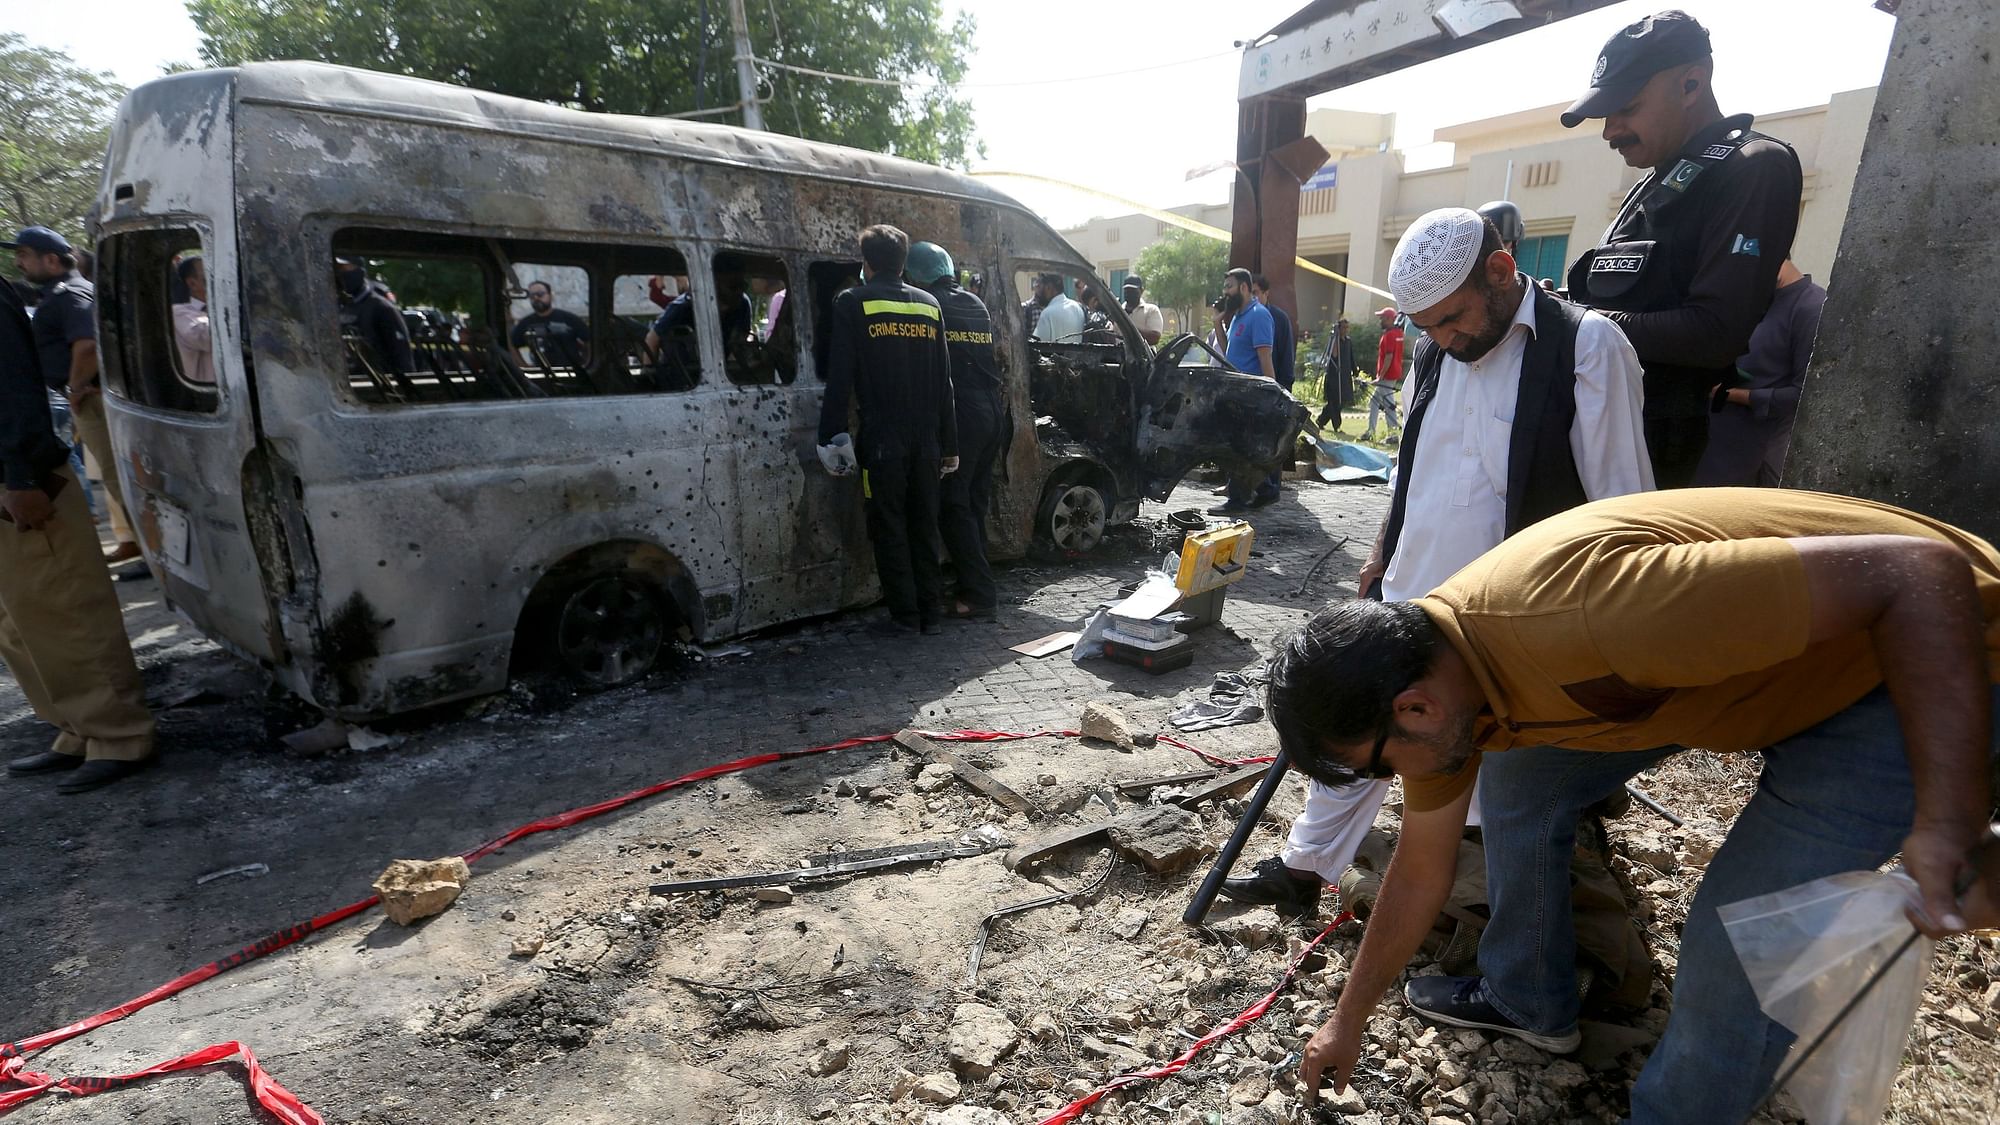 <div class="paragraphs"><p>Karachi: Pakistani investigators gather evidence at the site of explosion, in Karachi, Pakistan, Tuesday, April 26, 2022. The explosion ripped through a van inside a university campus in southern Pakistan on Tuesday, killing several people including Chinese nationals and their Pakistani driver, officials said.<br></p></div>